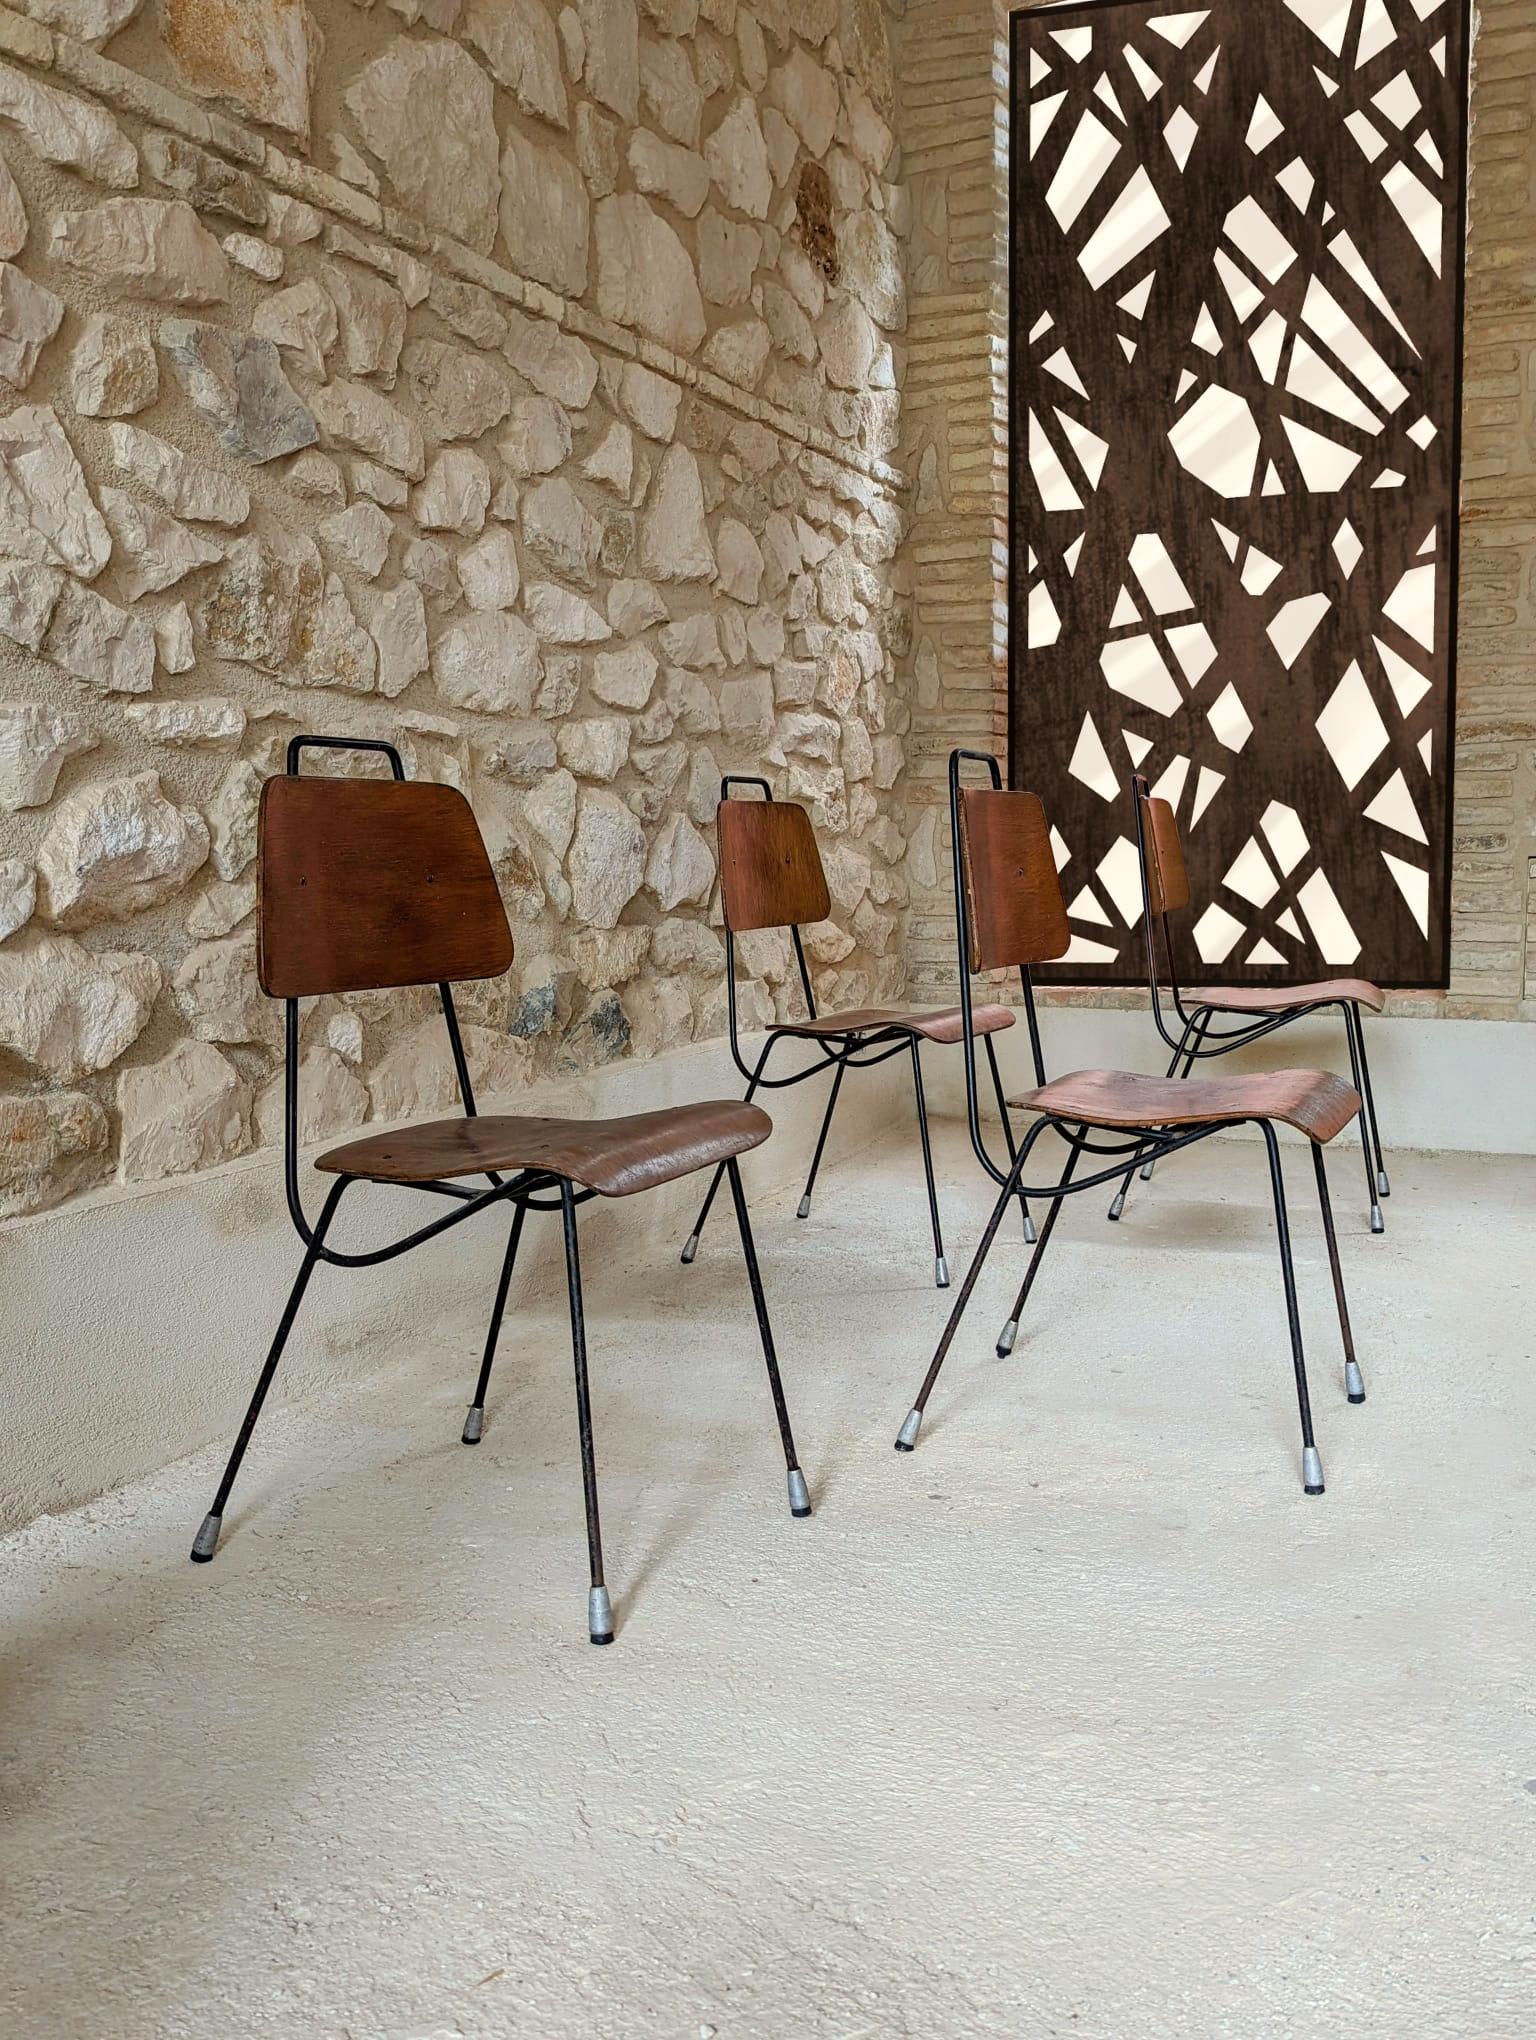 Spanish Set of 4 Chairs by Antoni De Moragas 1950s For Sale